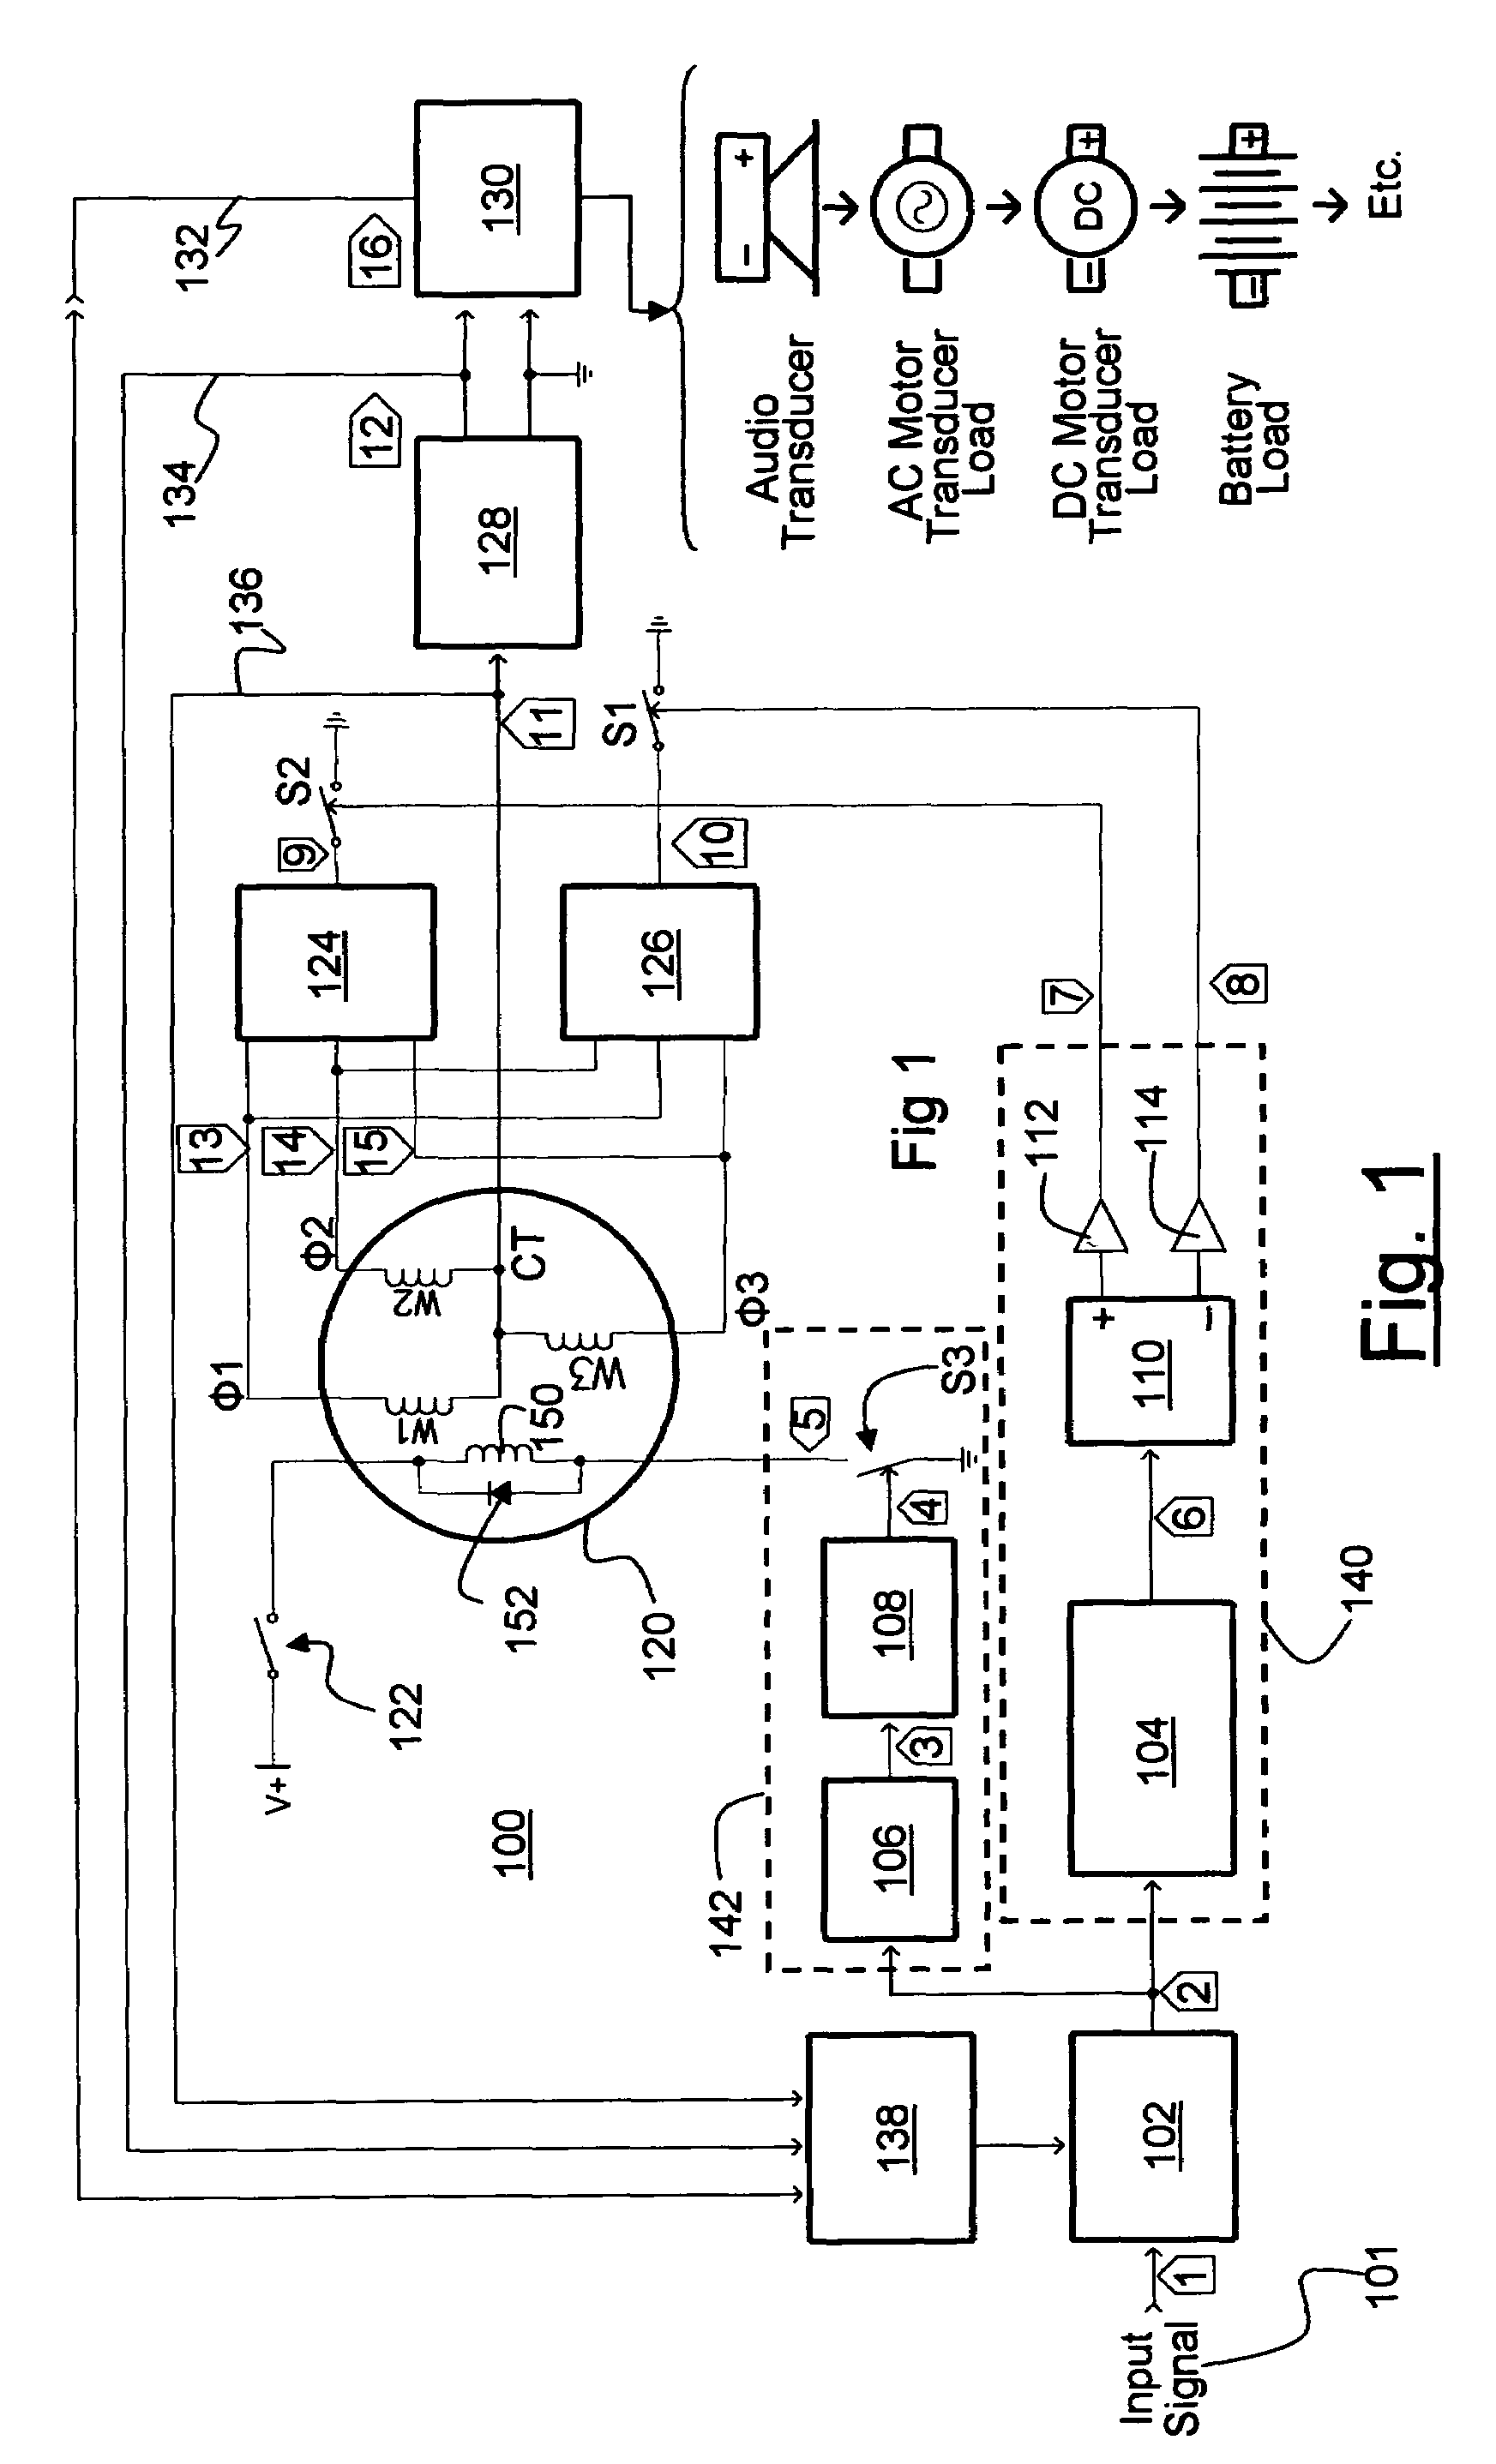 Signal amplification through an electromagnetic device